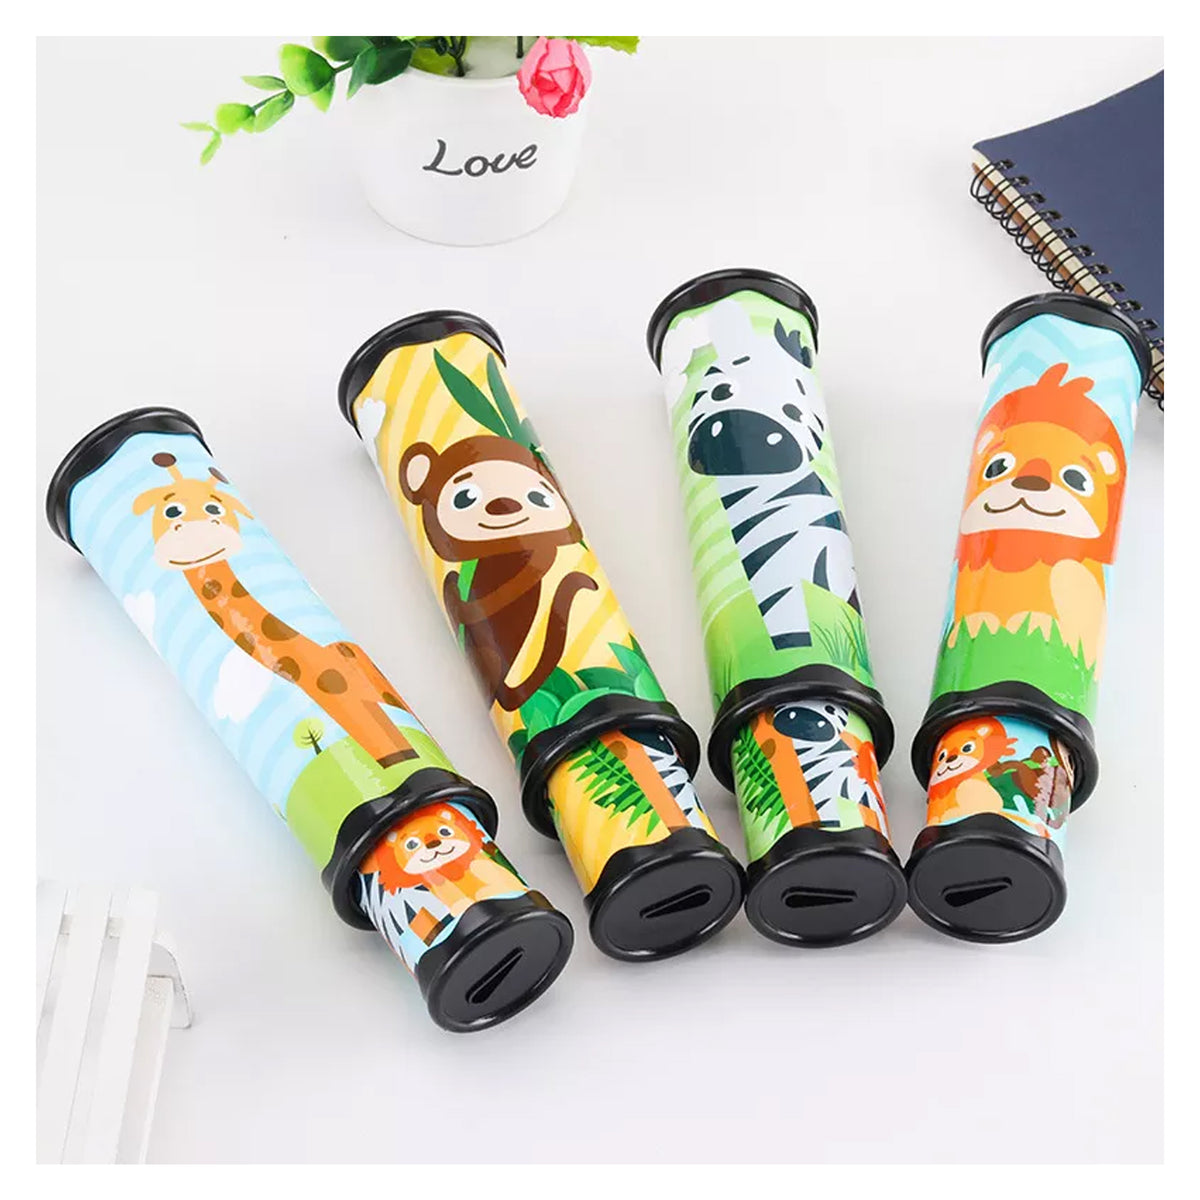 Rotational Telescope Puzzle Kaleidoscope Magic Toy - Fun and Educational Toy for Kids and Adults